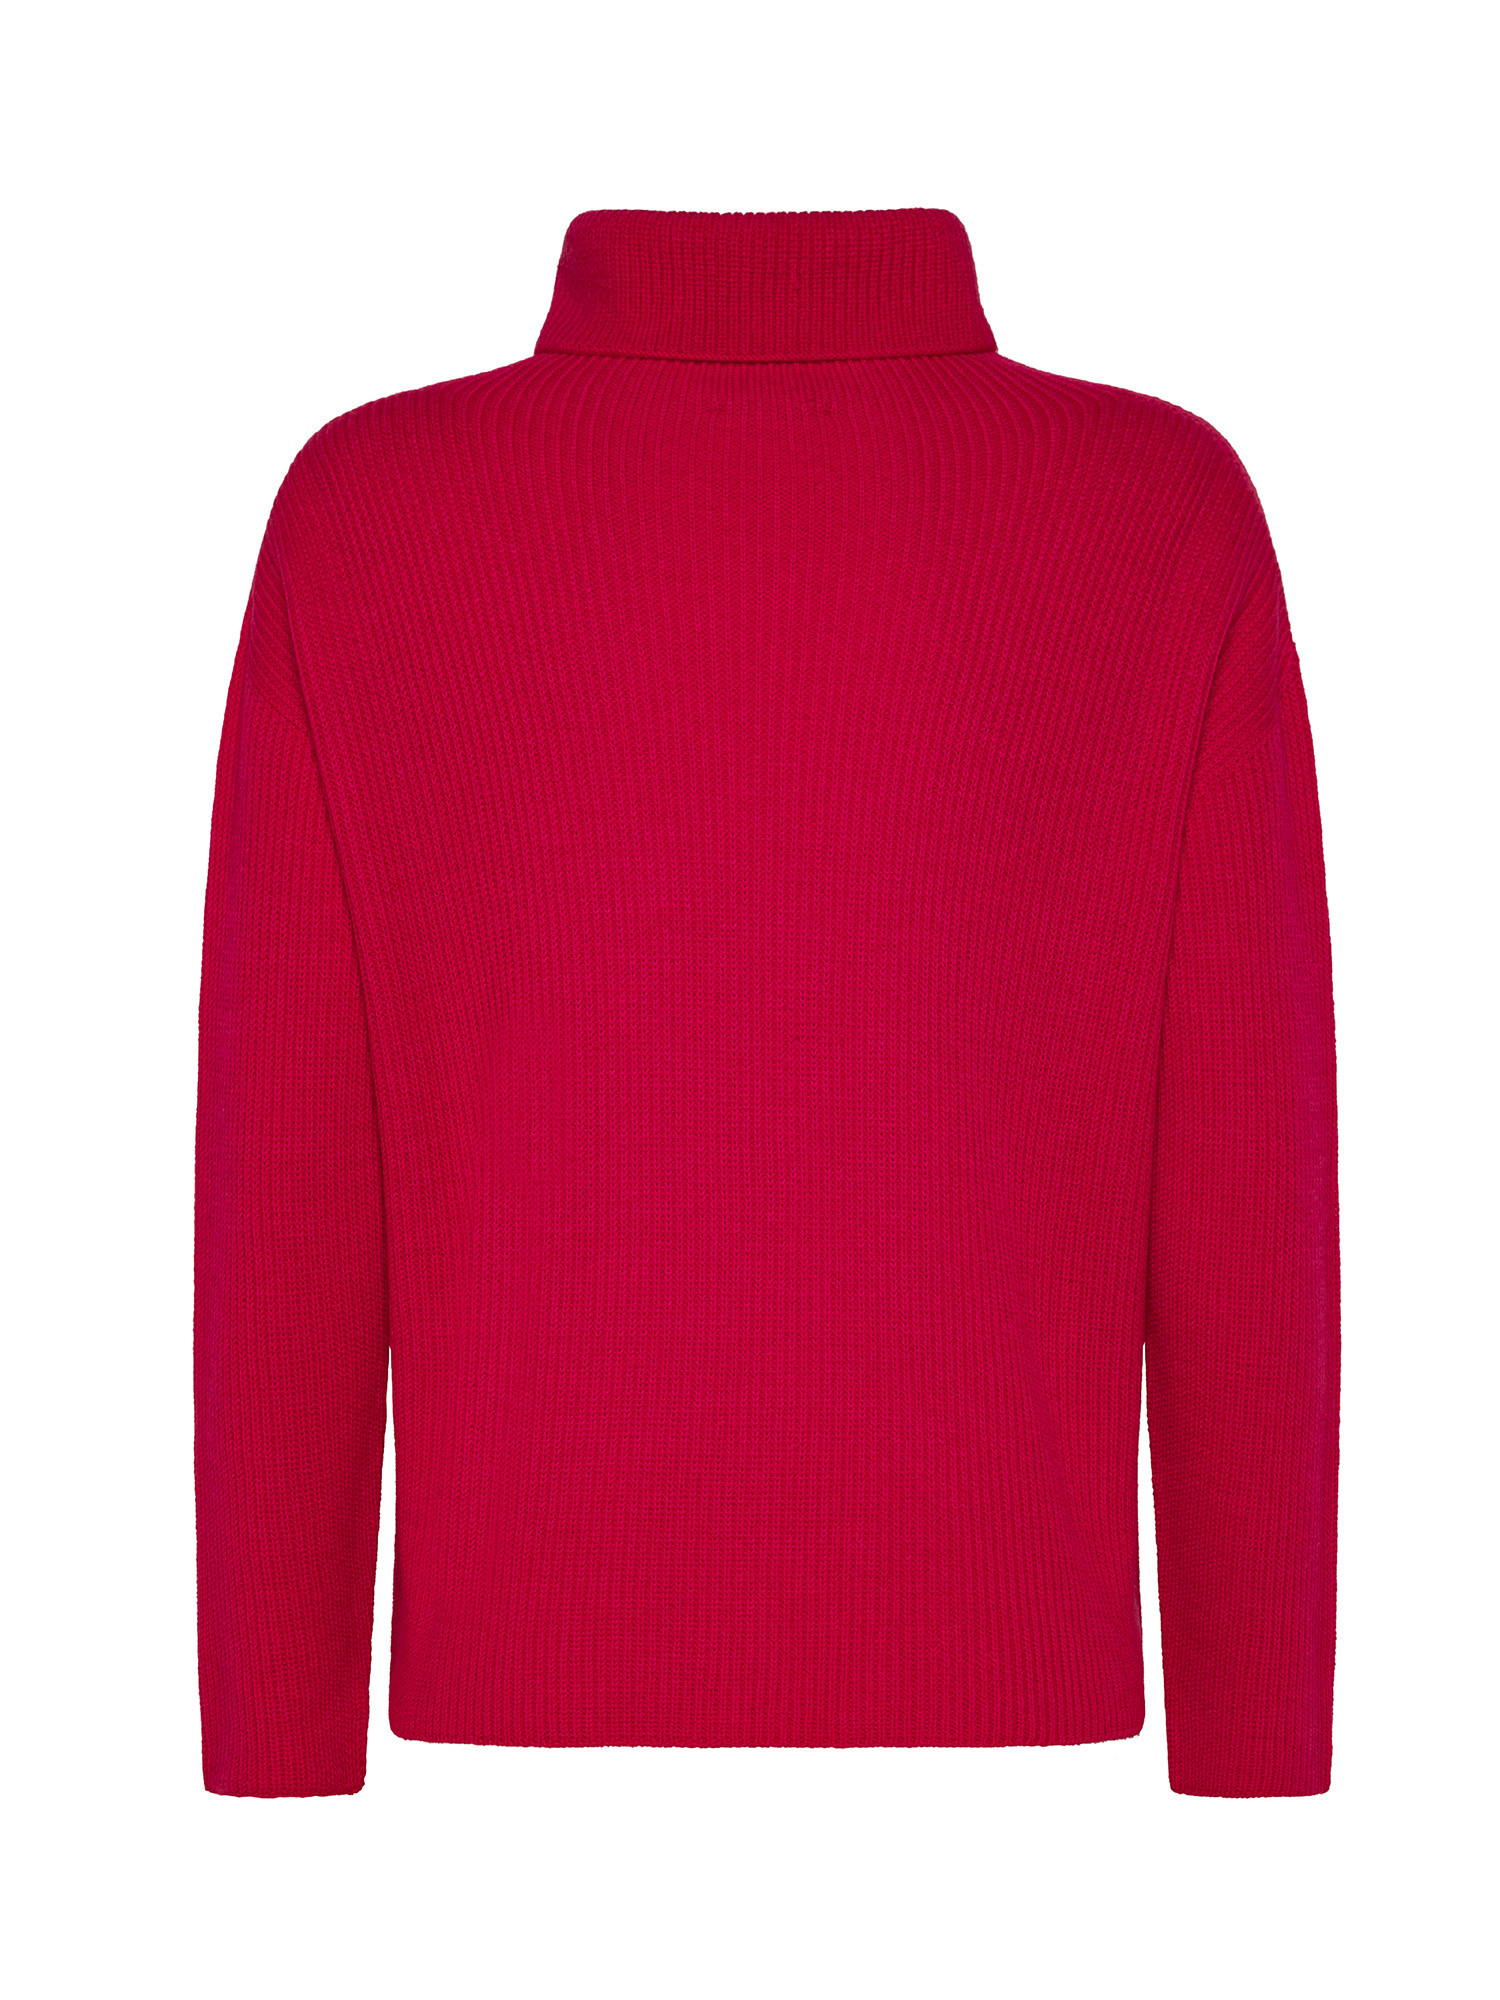 K Collection - Turtleneck pullover in extrafine wool, Pink Fuchsia, large image number 1